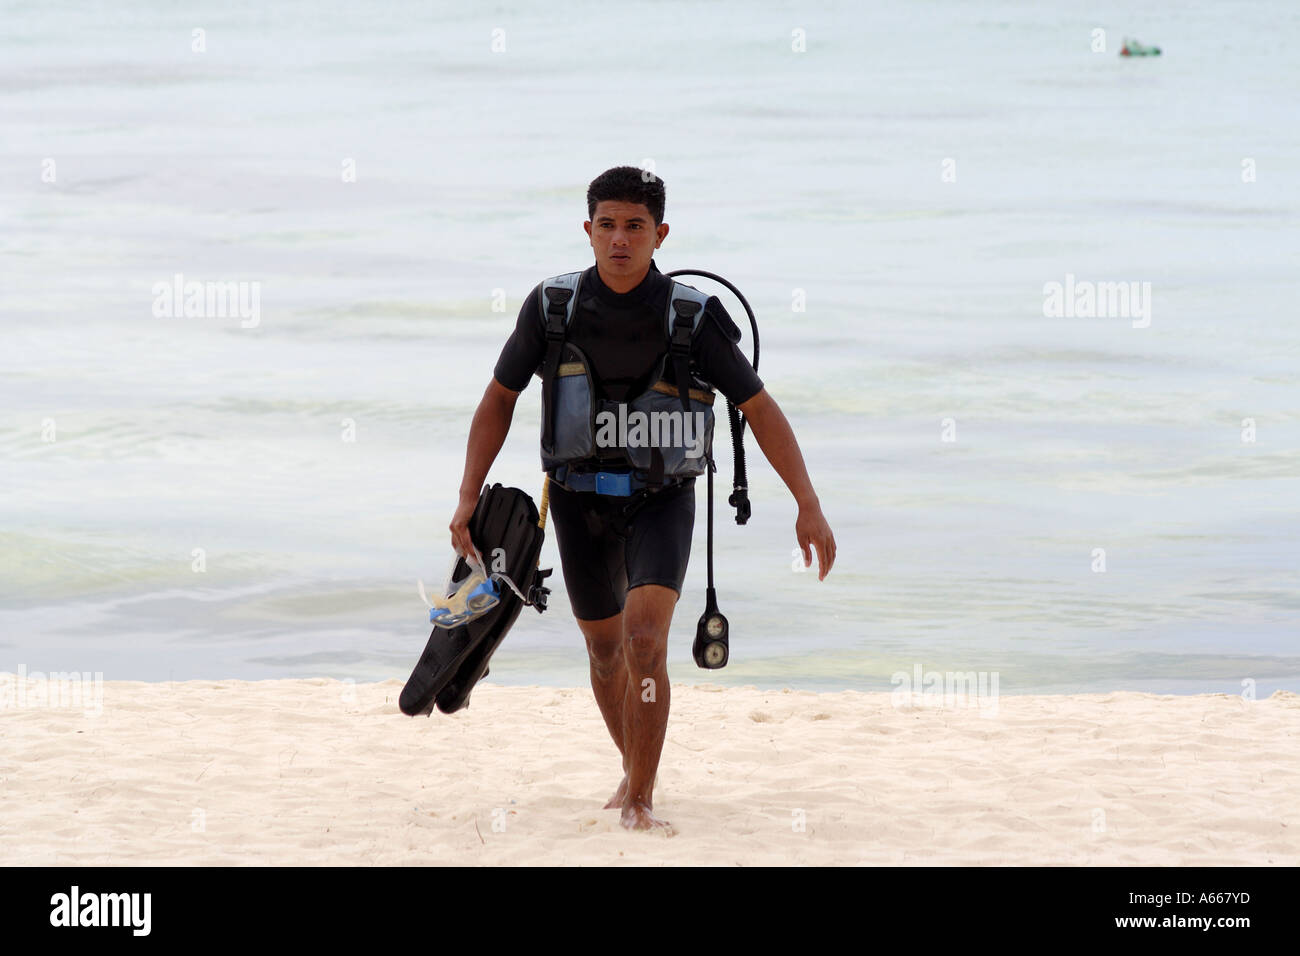 Scubadiver, man in scuba gear returns from diving in the waters off of the beach of Boracay, Philippine Islands Stock Photo